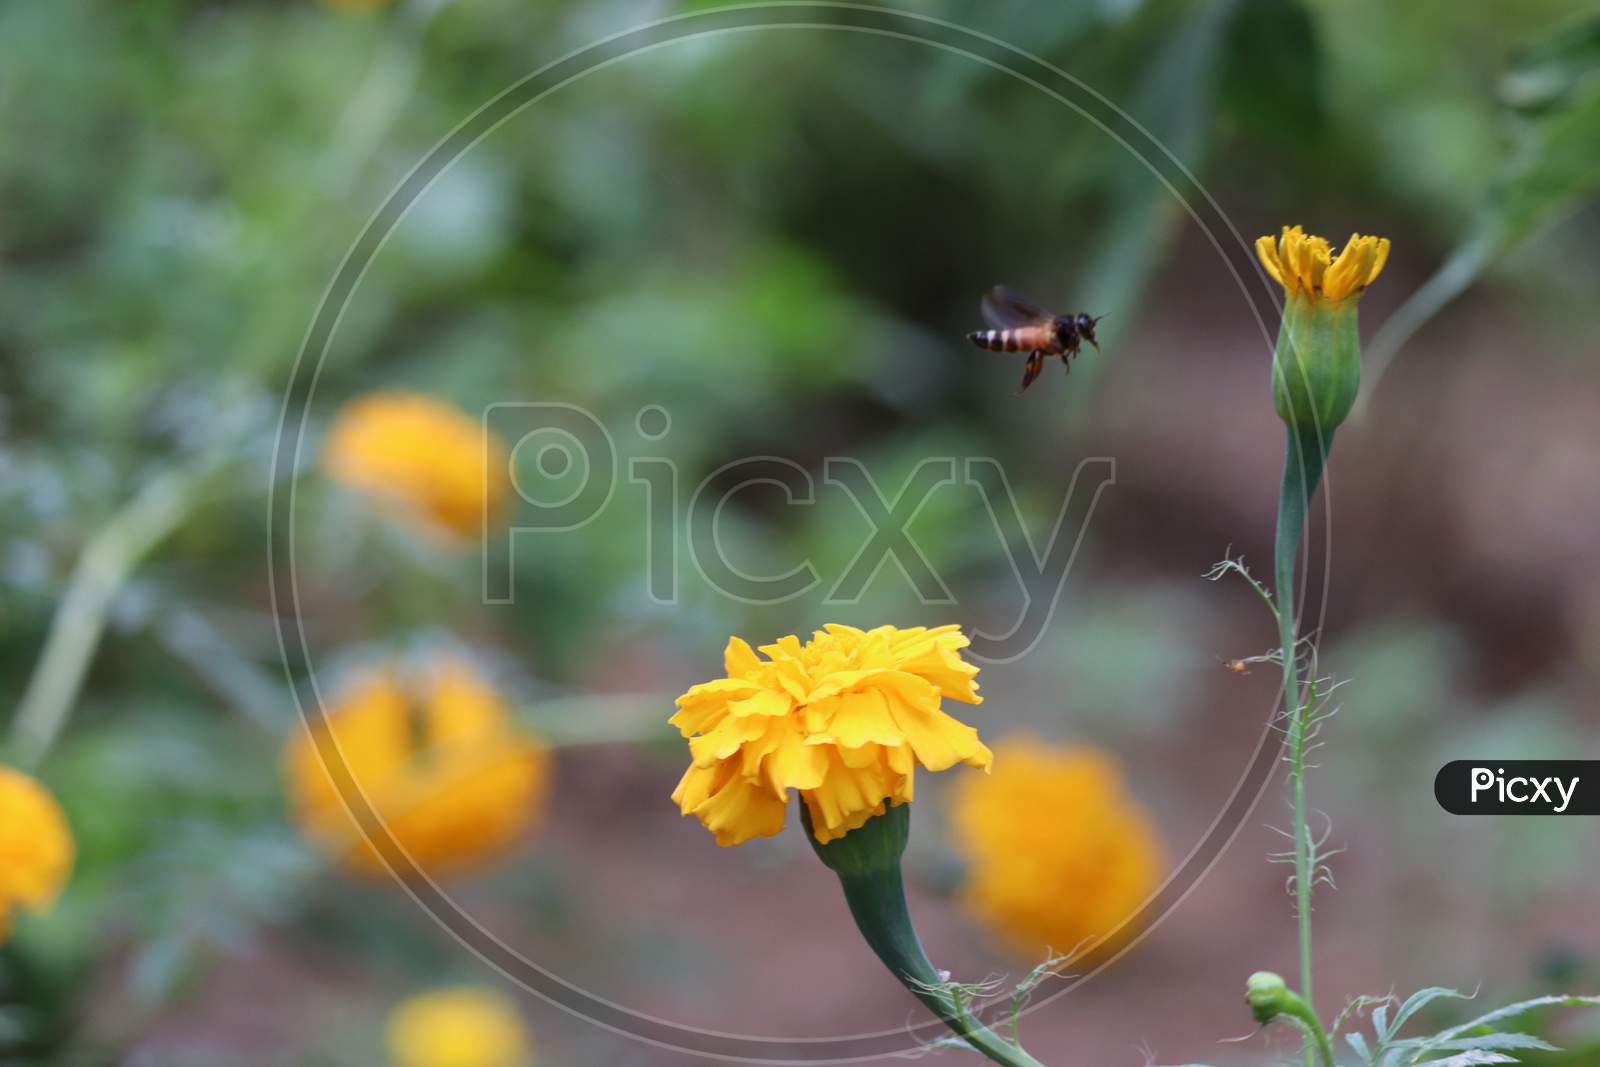 Bee Flying Over The Yellow Marigold Flower In Blur Background. Rajasthan, India